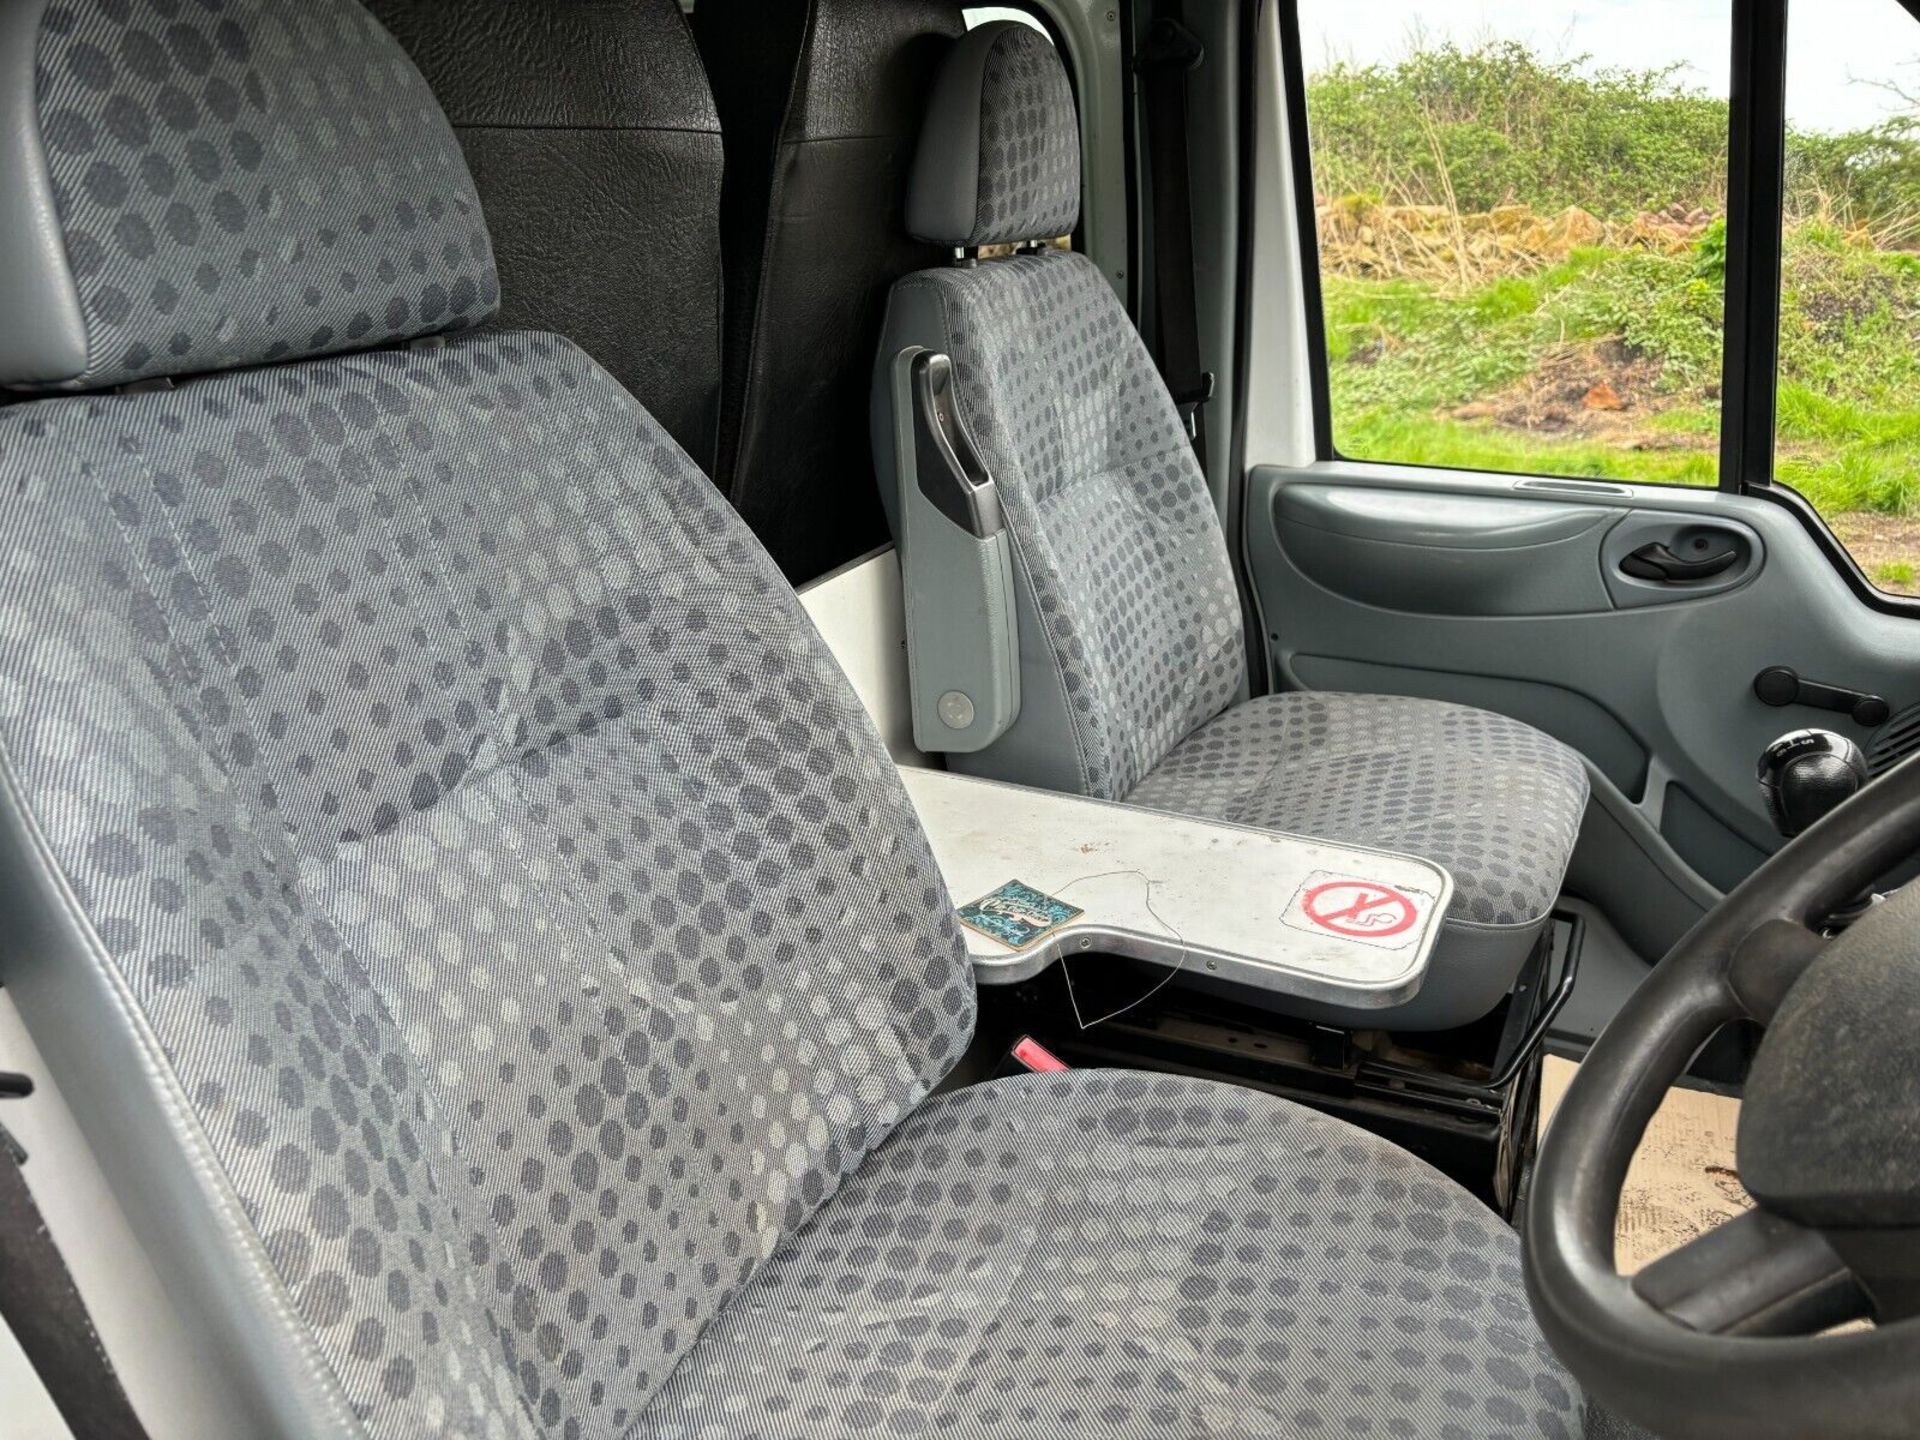 2008 FORD TRANSIT 140 T350 7 SEAT WELFARE VEHICLE - Image 6 of 16